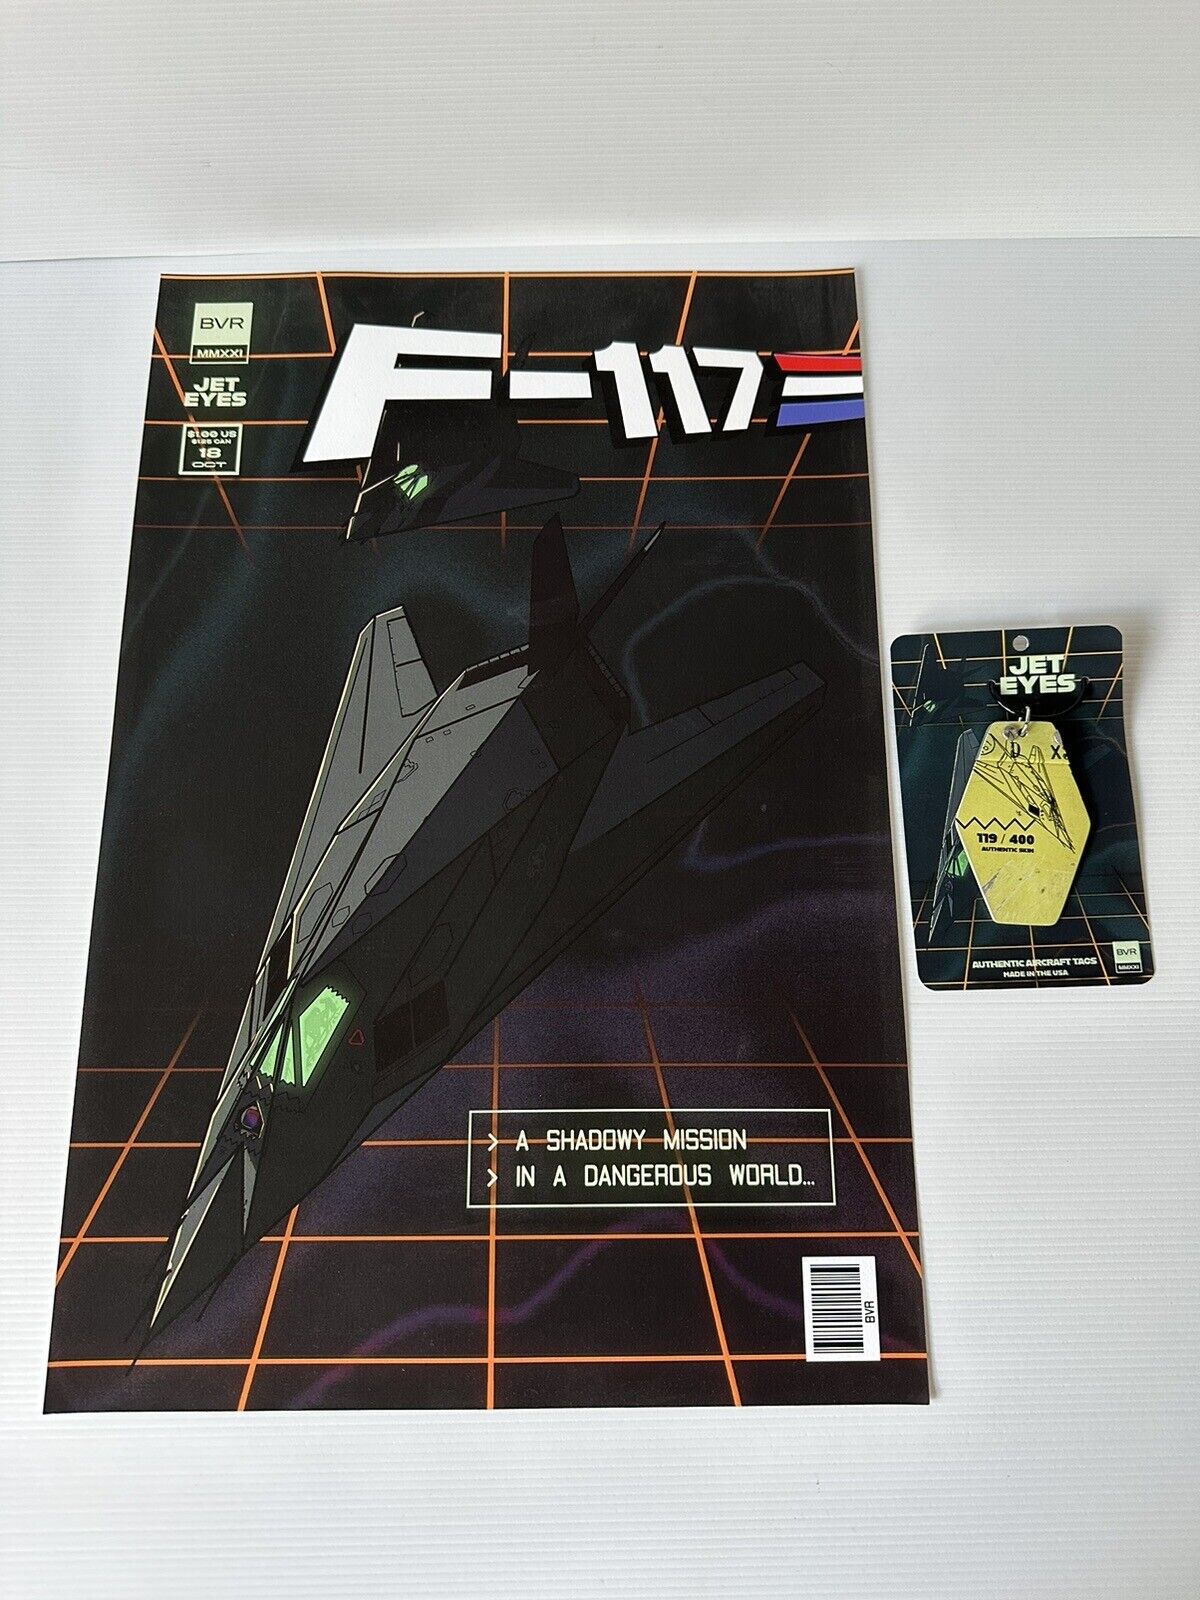 F-117A NIGHTHAWK LOCKEED MARTIN NUMBER 119 OF ONLY 400 WITH ORIGINAL POSTER